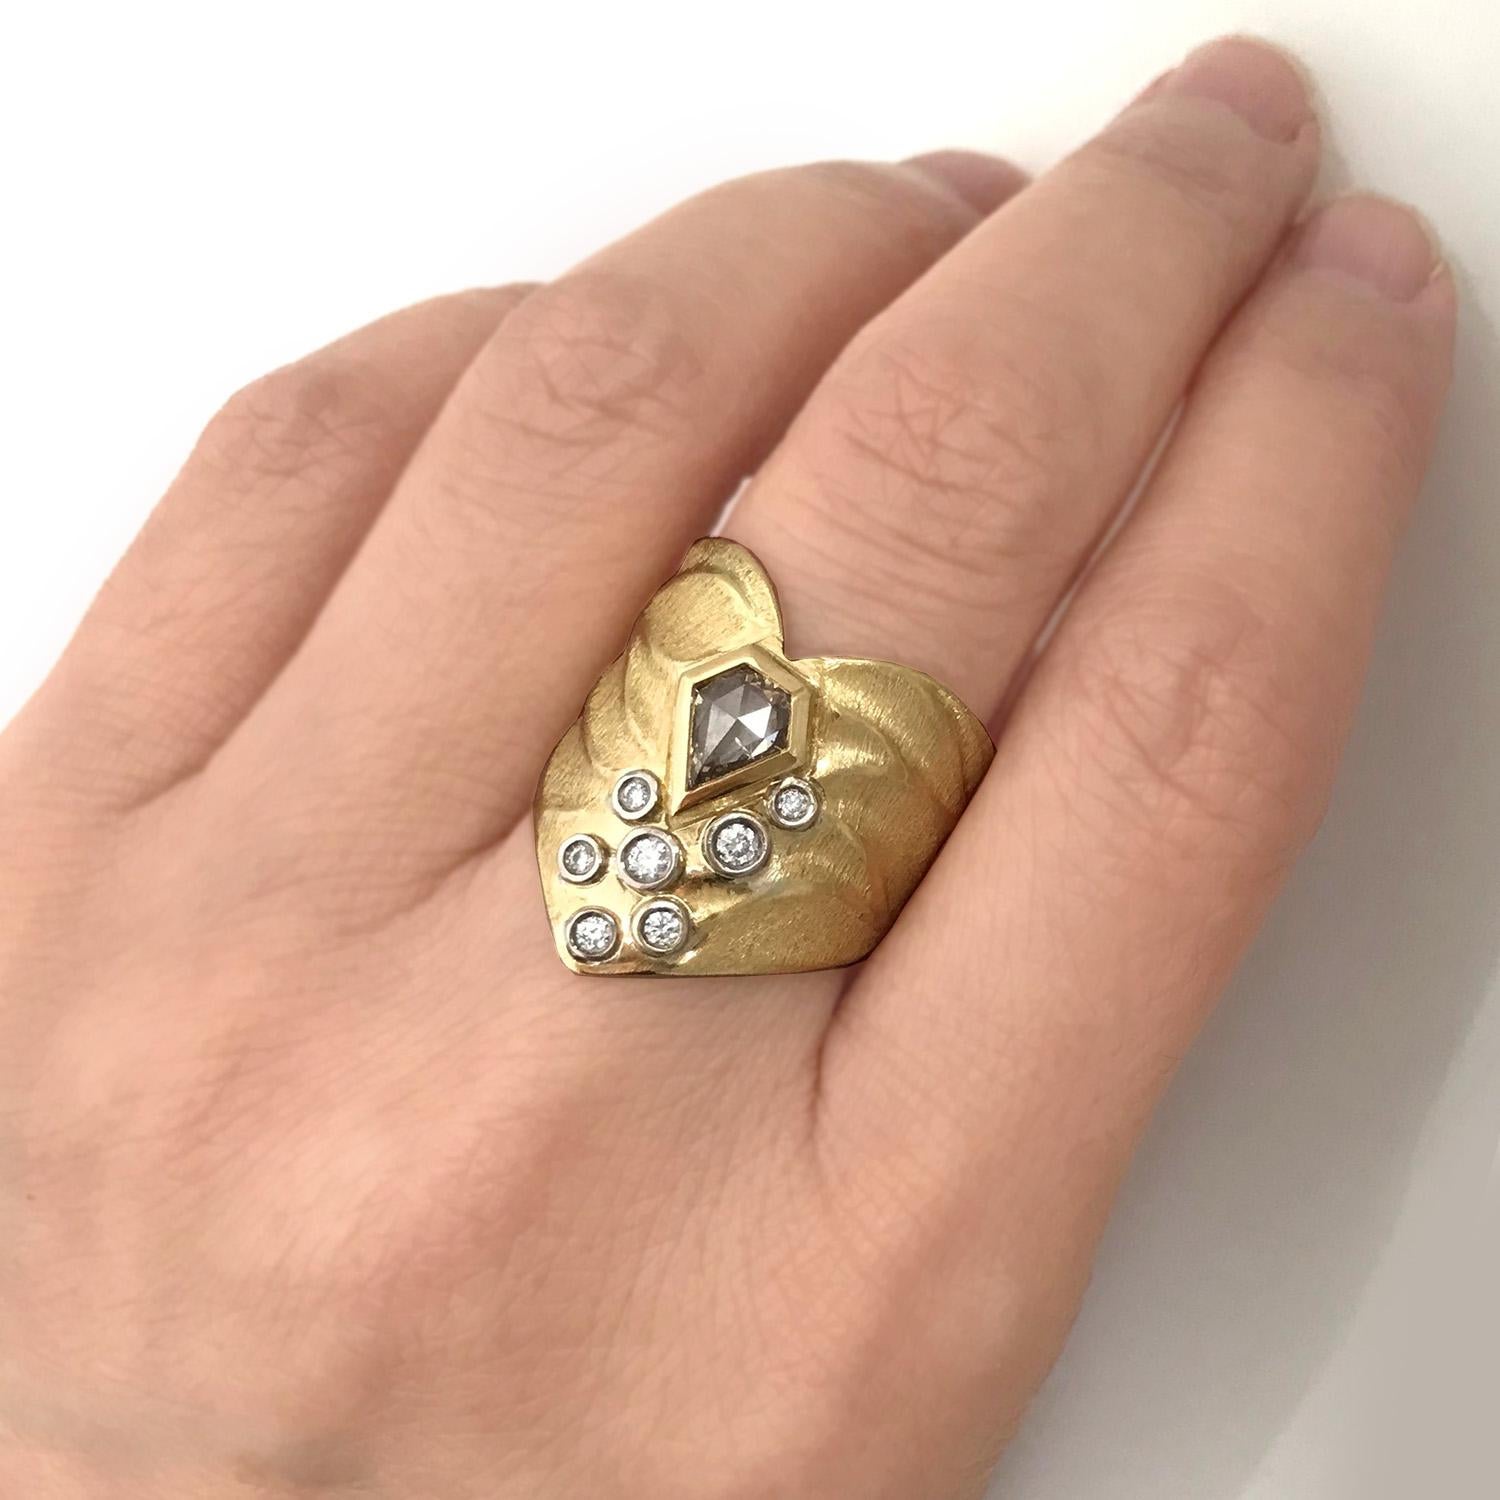 K.Mita's Chevron Heart Ring, which is made from 18 Karat Yellow Gold, features a 0.44 Carat Kite Shape Champagne Diamond accented with 0.165 Carat White Diamonds (total weight) set in 18 Karat Palladium White Gold. Ring Size 6.25 (contact us to